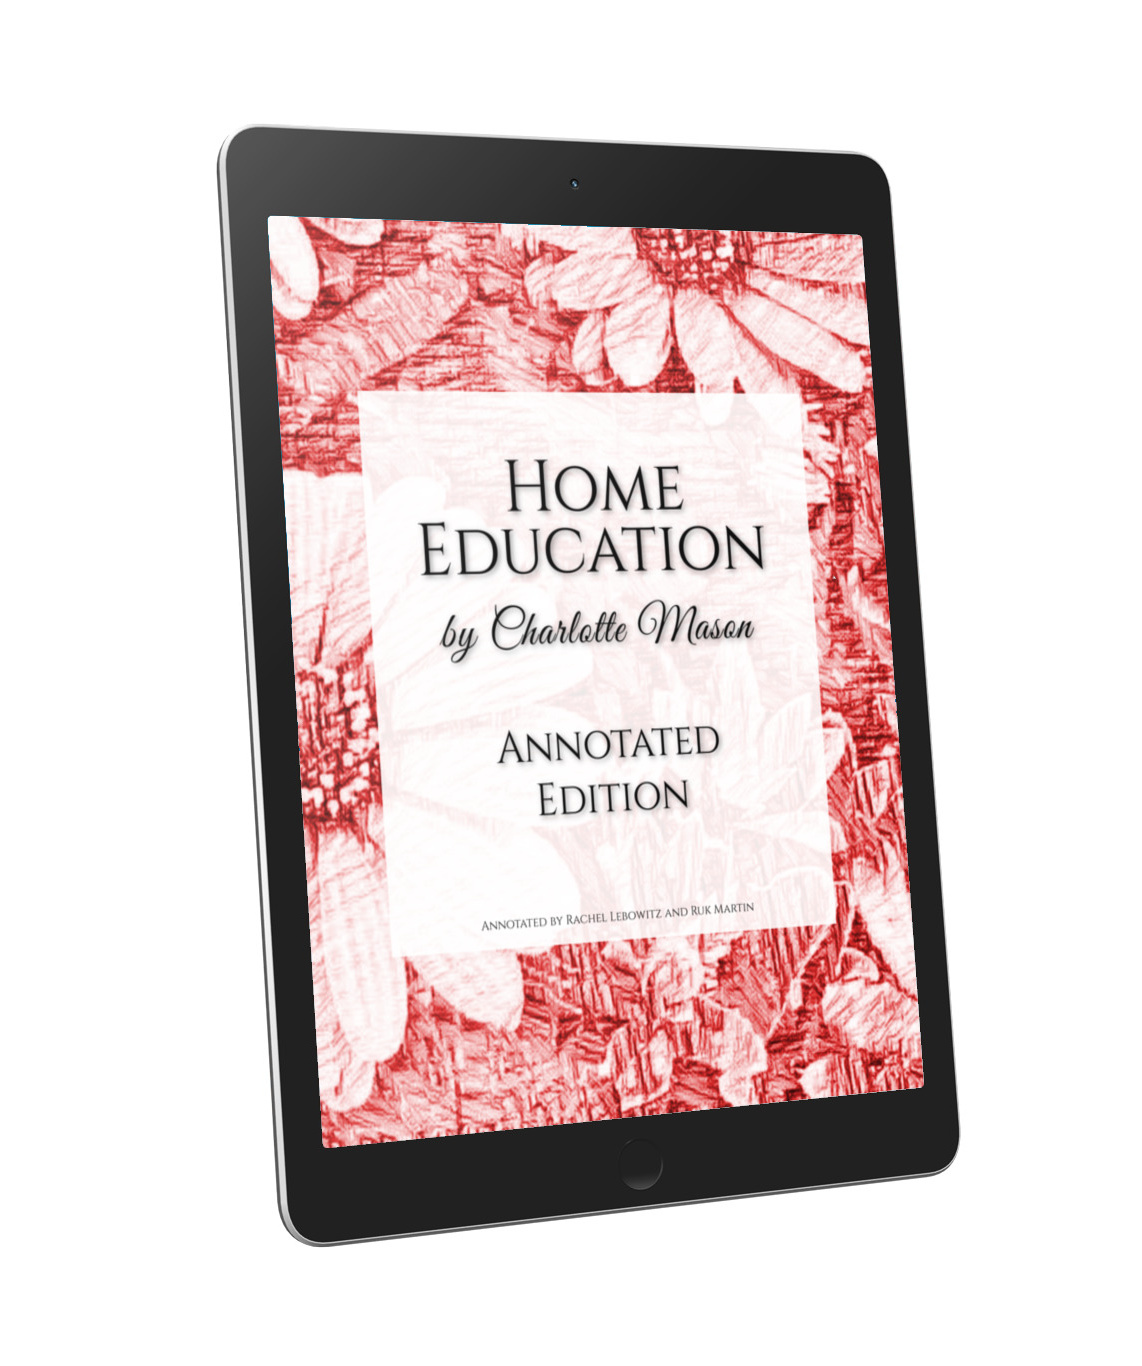 Home Education: Annotated Edition of Volume 1 by Charlotte Mason PDF Download